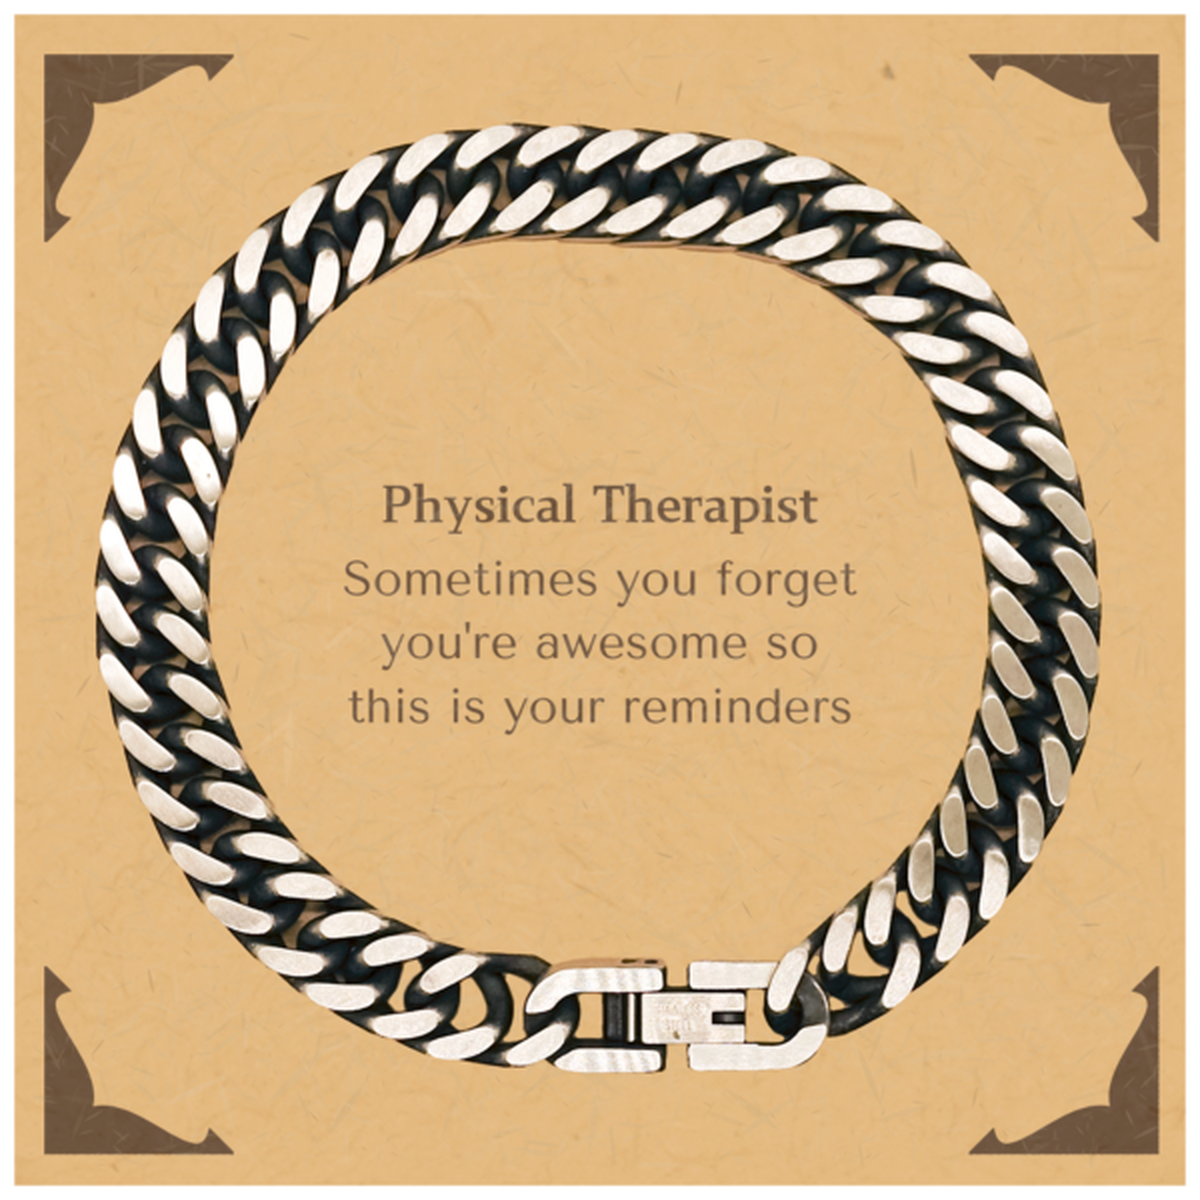 Sentimental Physical Therapist Cuban Link Chain Bracelet, Physical Therapist Sometimes you forget you're awesome so this is your reminders, Graduation Christmas Birthday Gifts for Physical Therapist, Men, Women, Coworkers